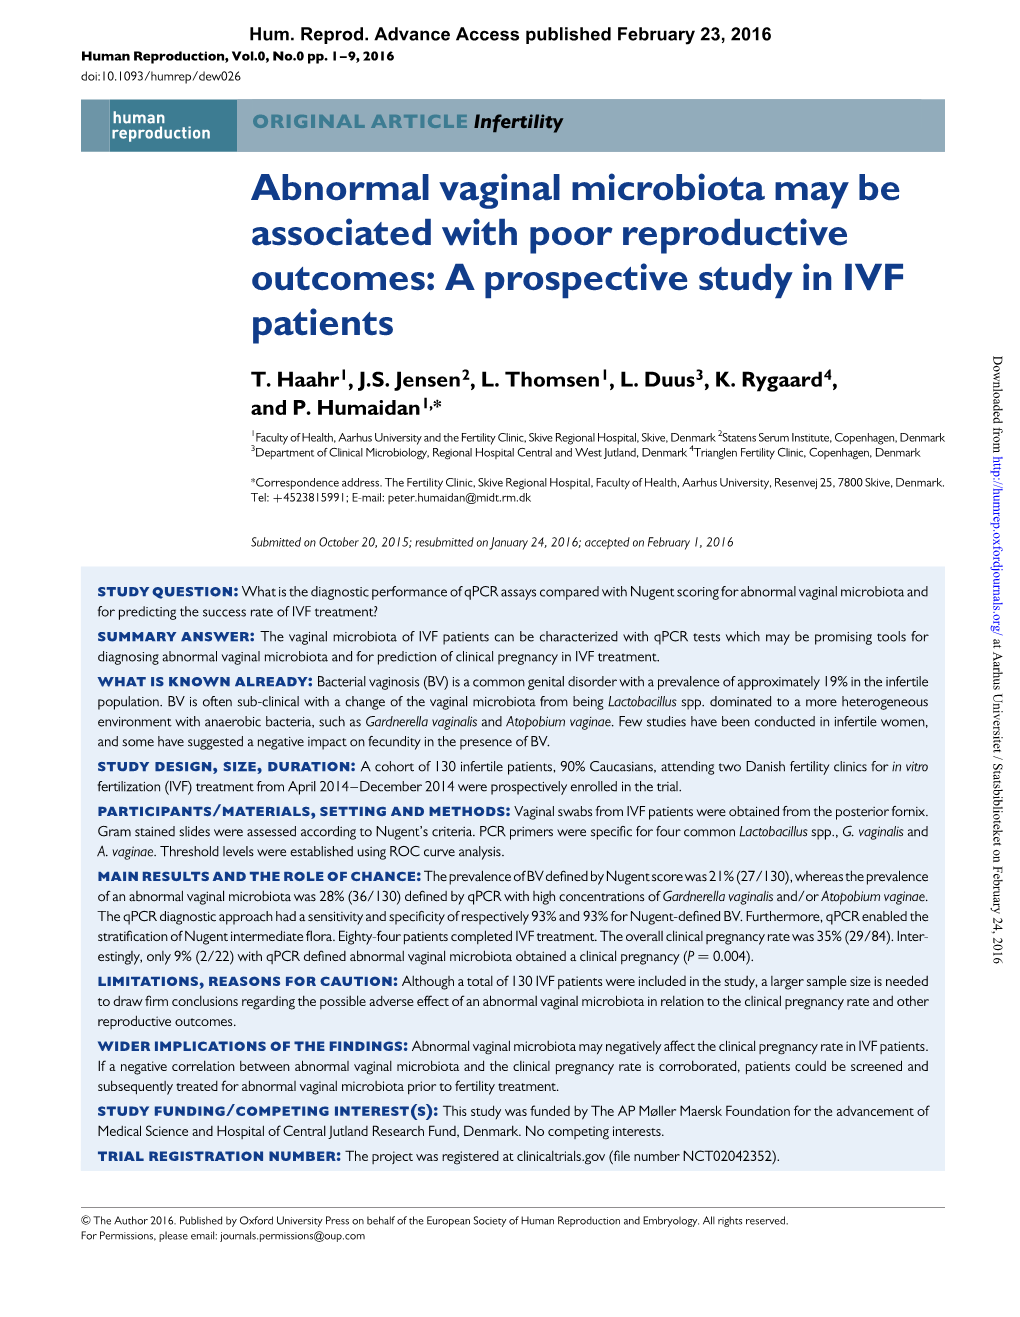 Abnormal Vaginal Microbiota May Be Associated with Poor Reproductive Outcomes: a Prospective Study in IVF Patients Downloaded from T